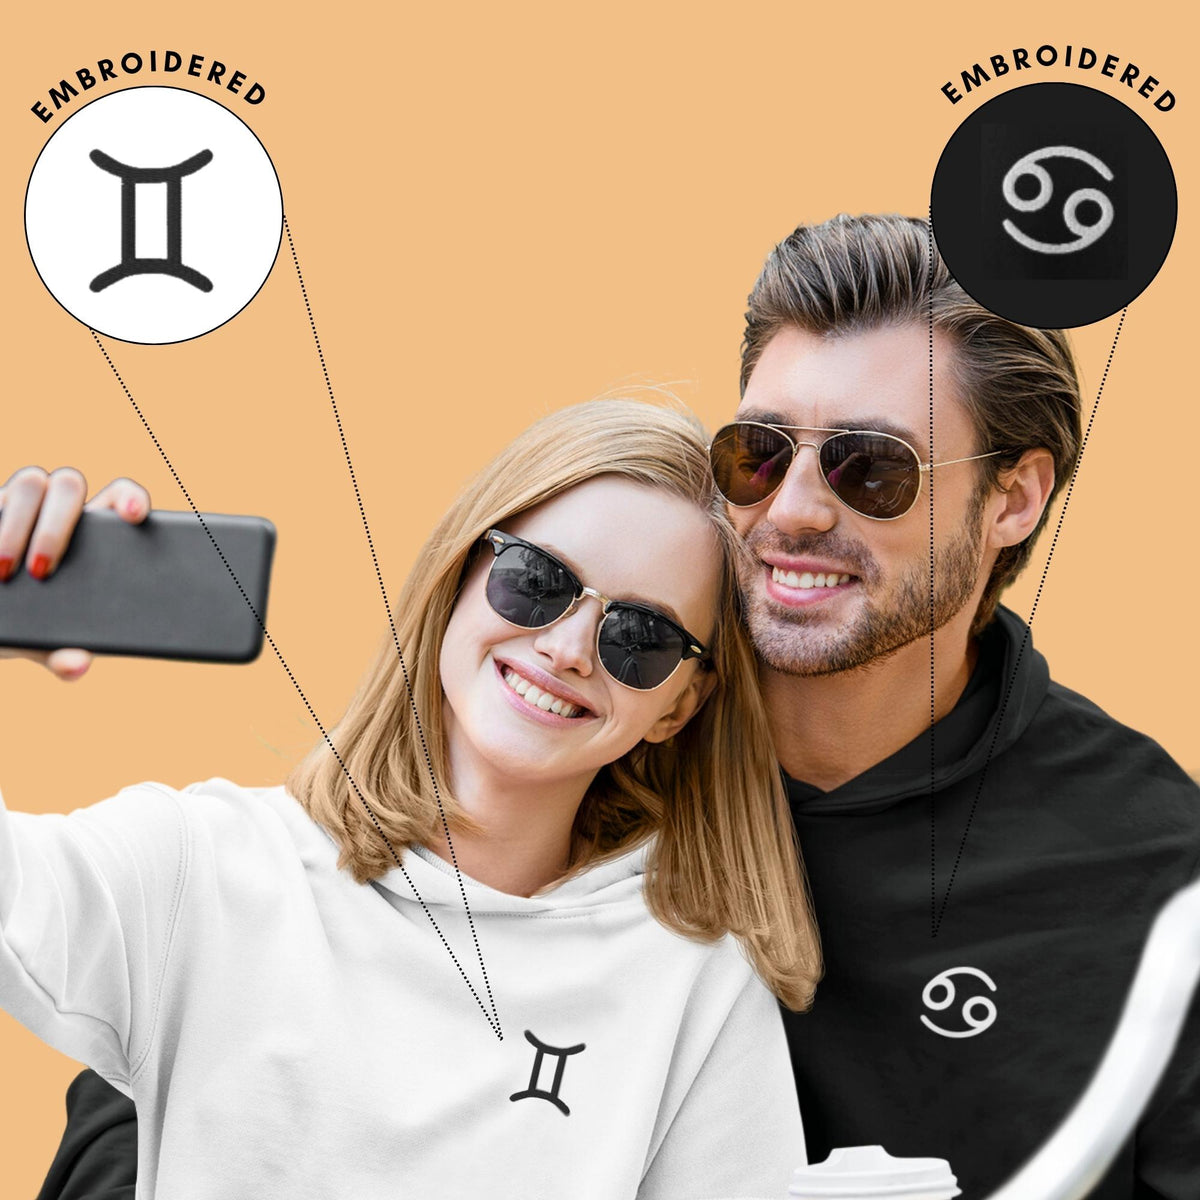 Embroidered Zodiac Sign Personalised Pack Of 2 Hoodies